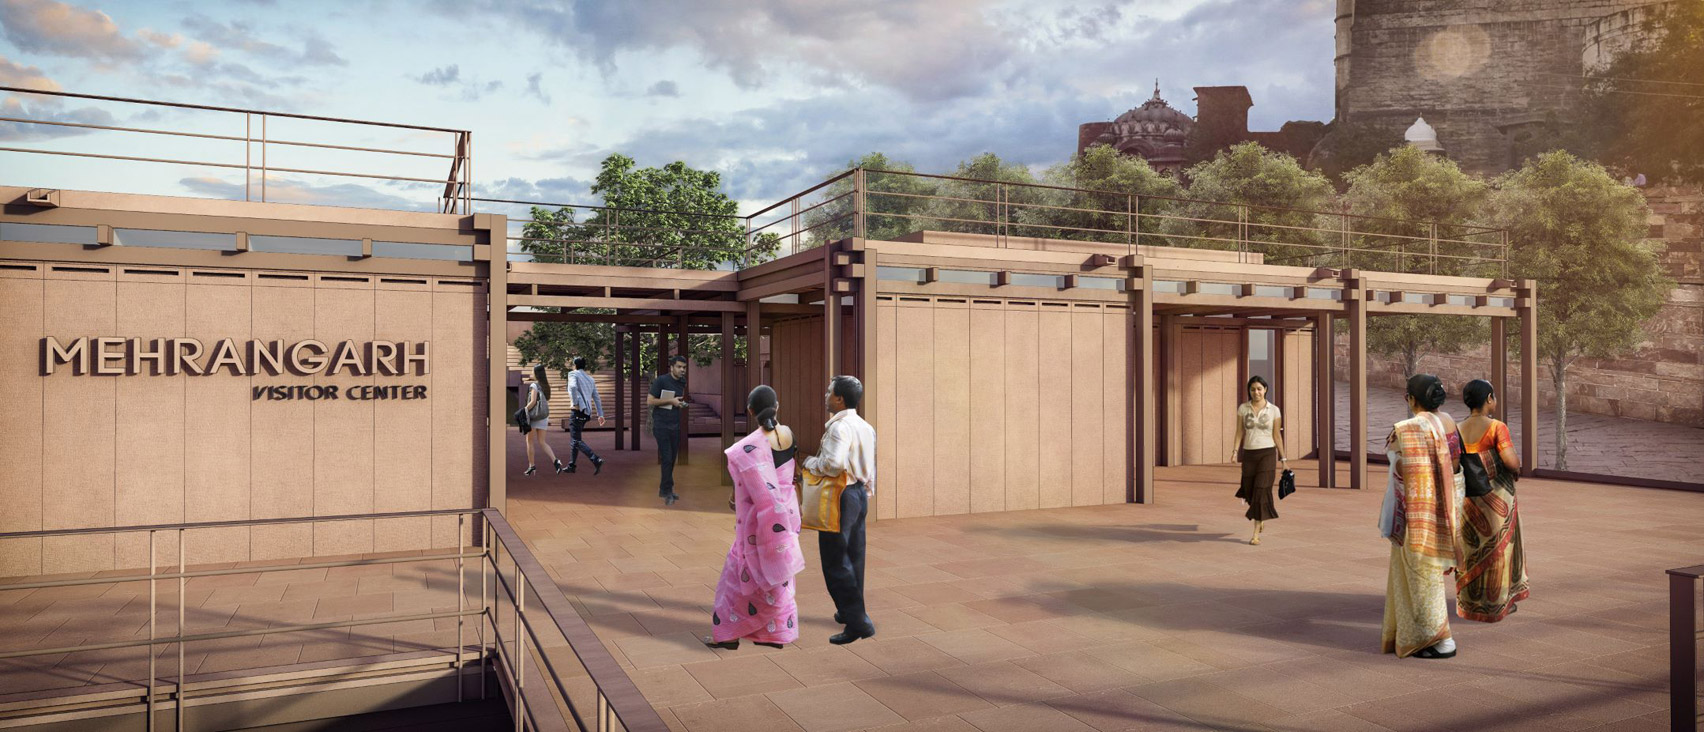 Entrance to the Mehrangarh Fort visitor centre by Studio Lotus